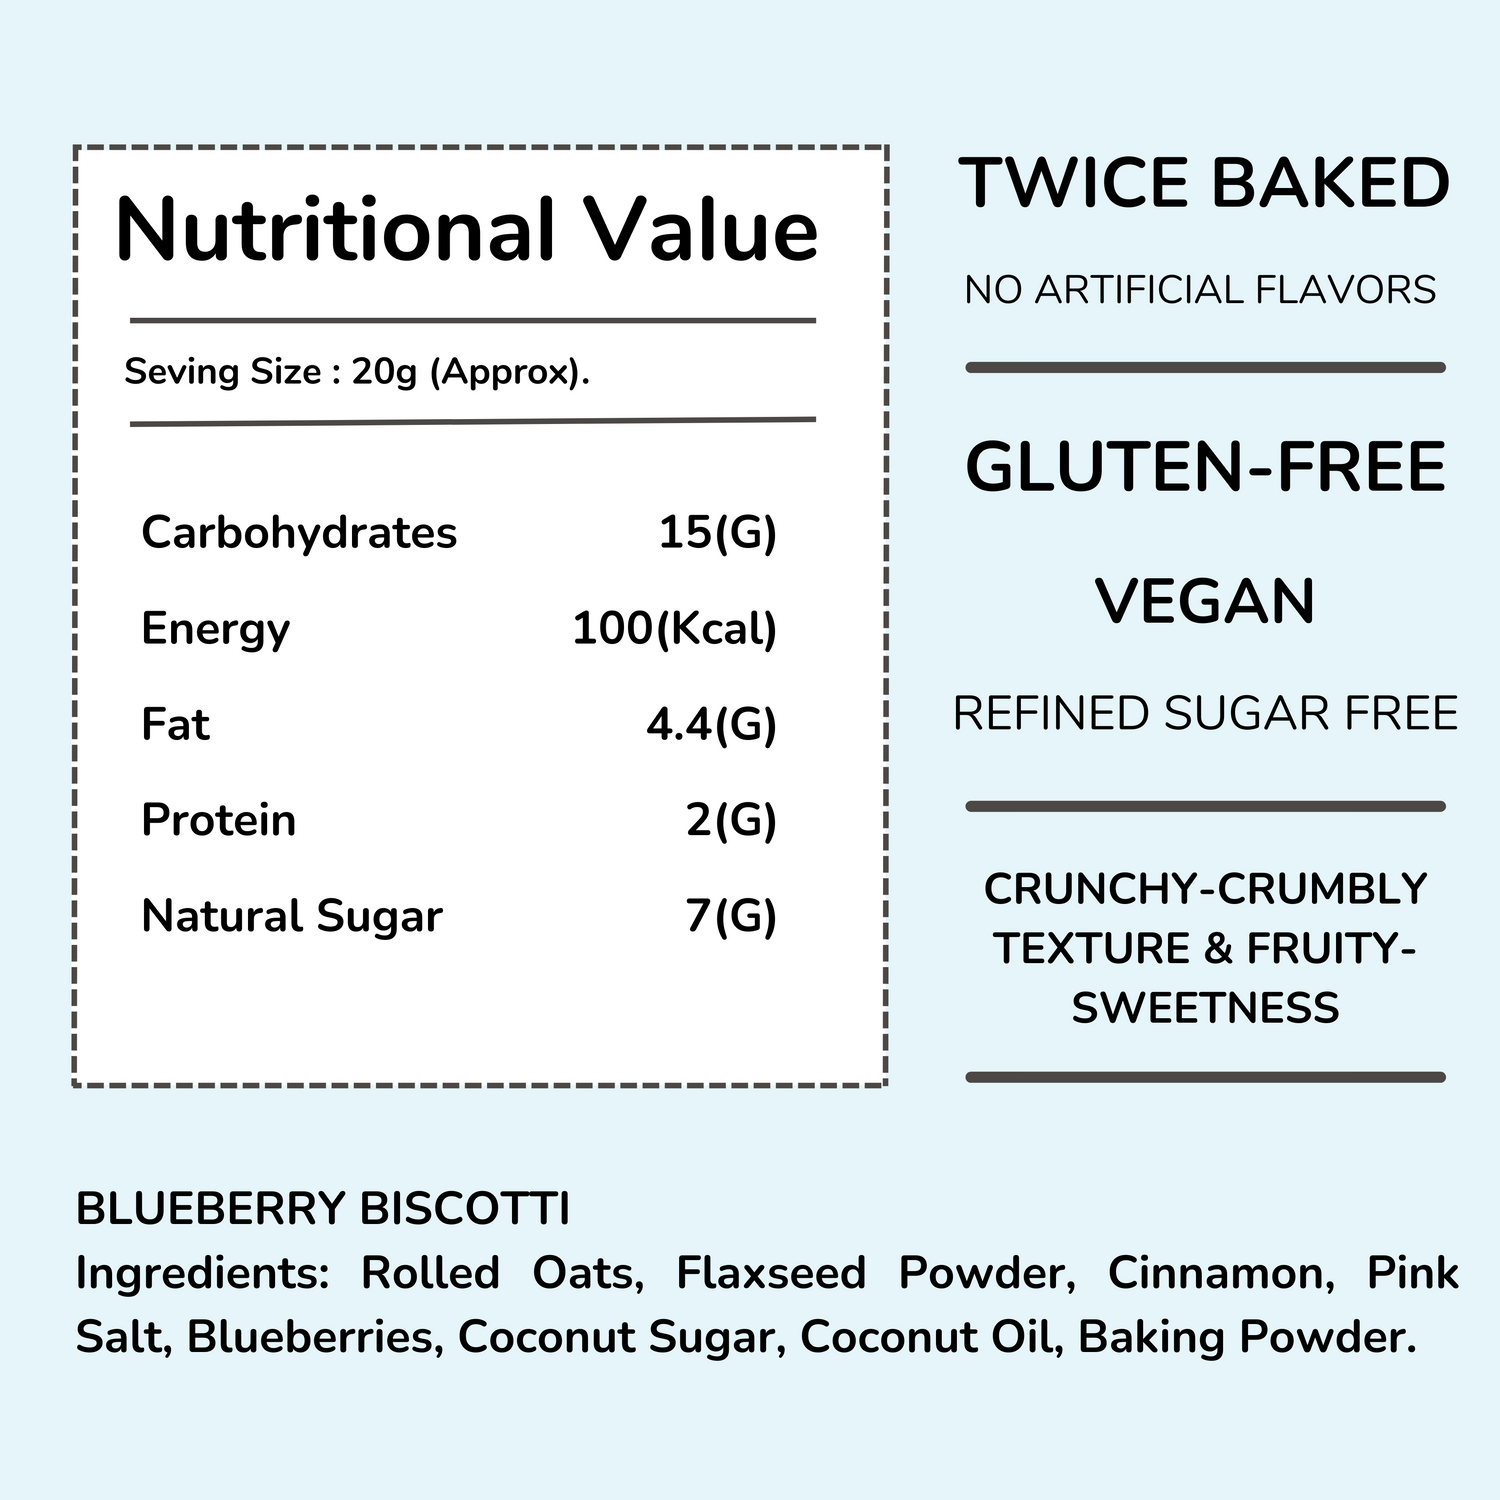 Nutritional Value of blueberry biscotti